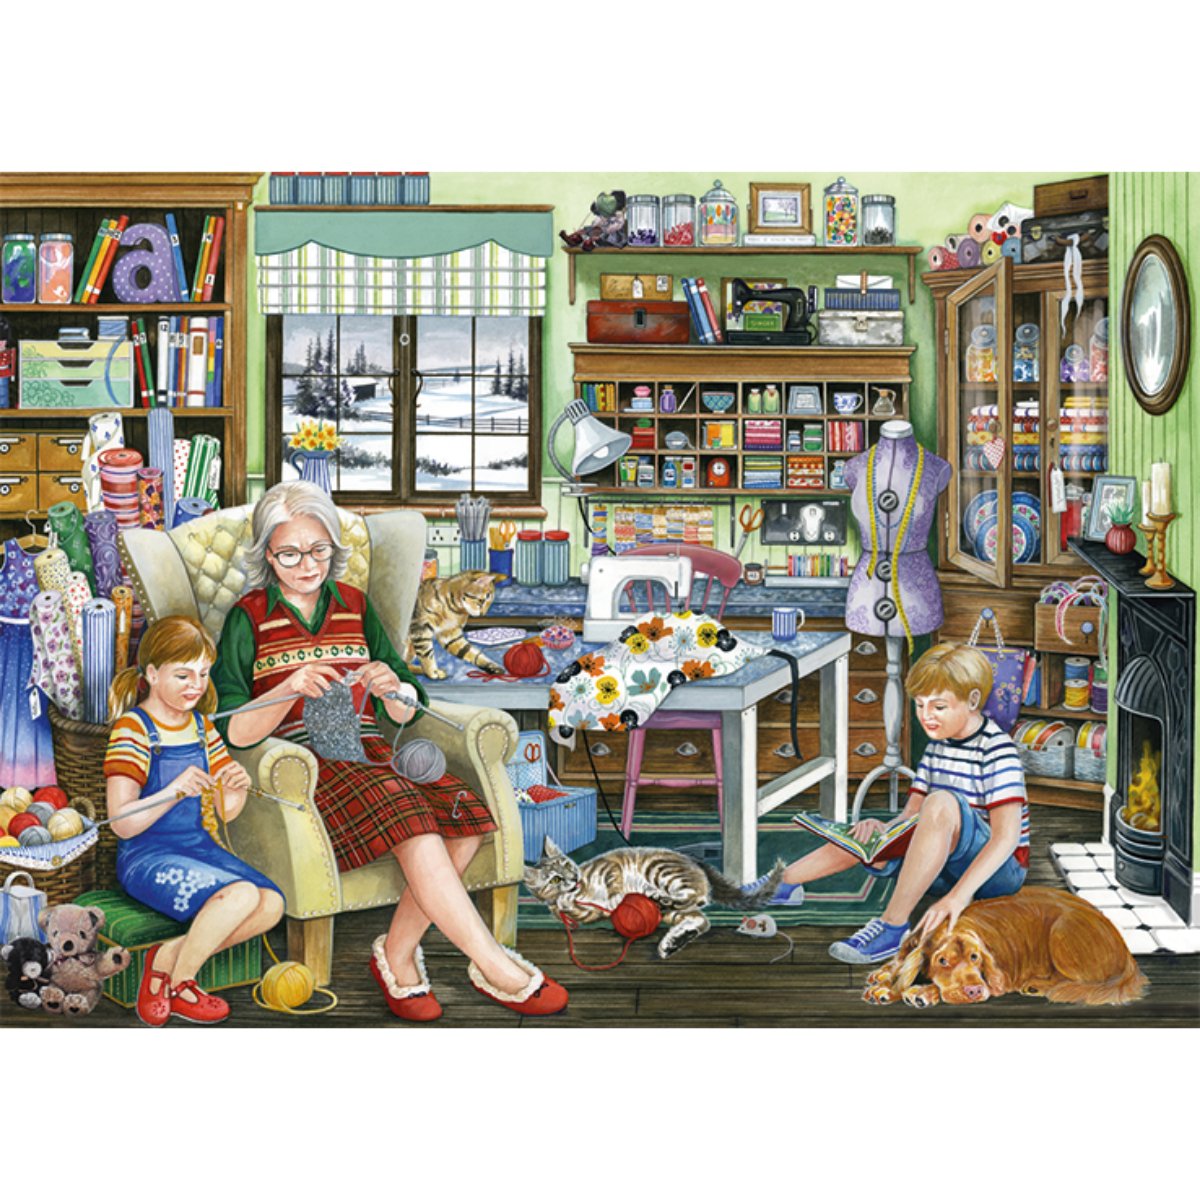 Falcon Granny's Sewing Room Jigsaw Puzzle (1000 Pieces)